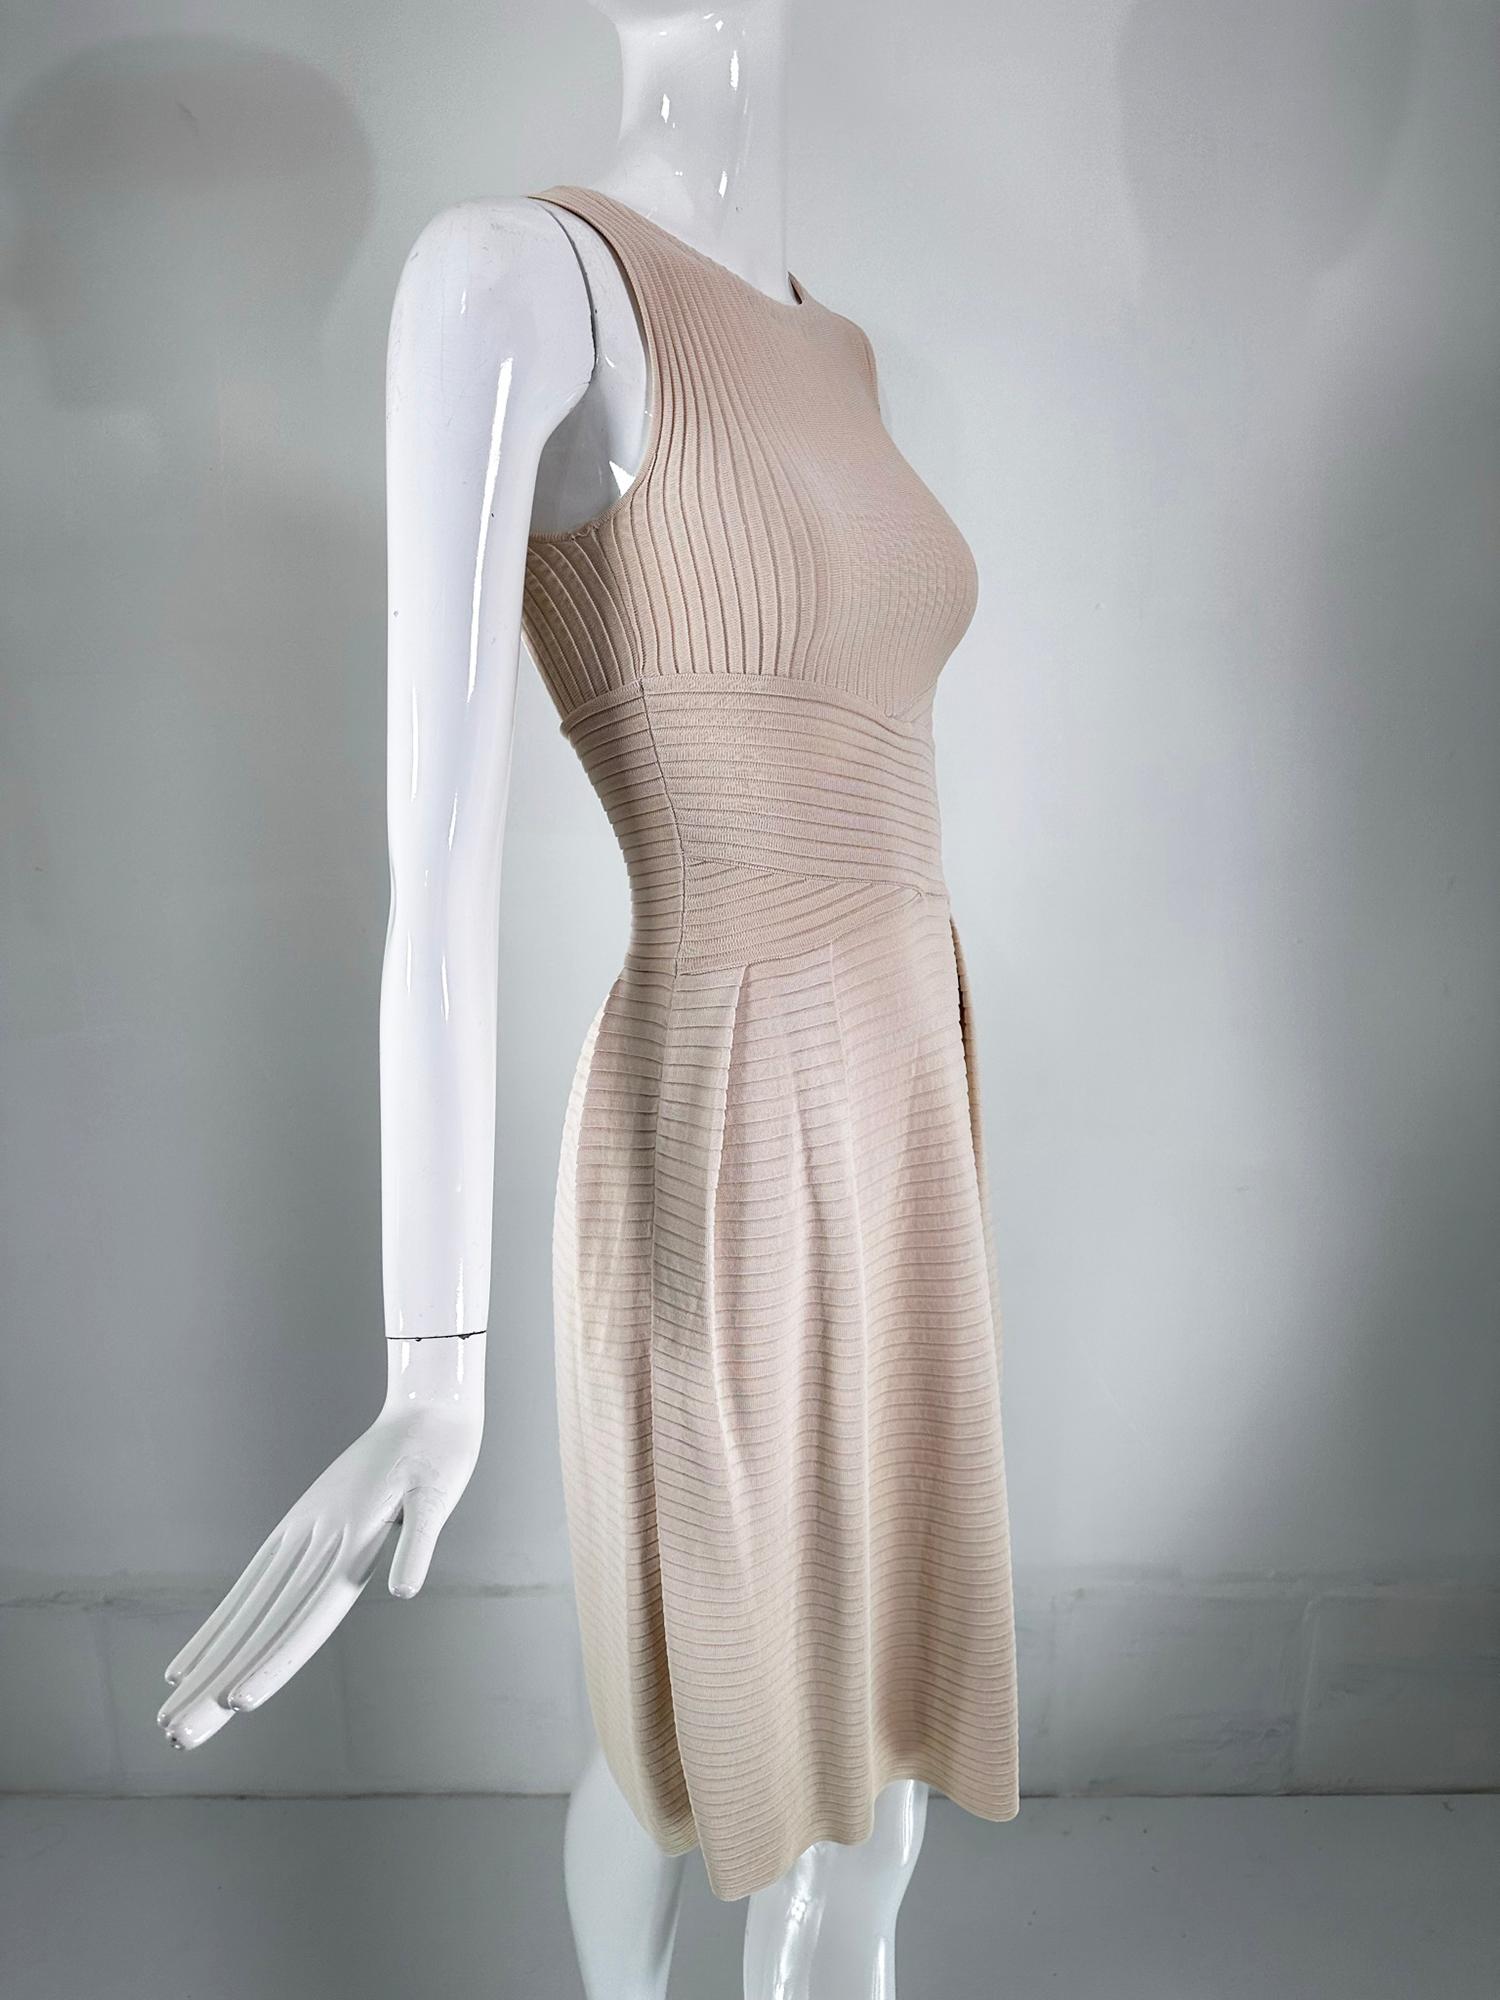 Christian Dior Paris Ribbed Knit Beige Tank Dress 2010 In Good Condition For Sale In West Palm Beach, FL